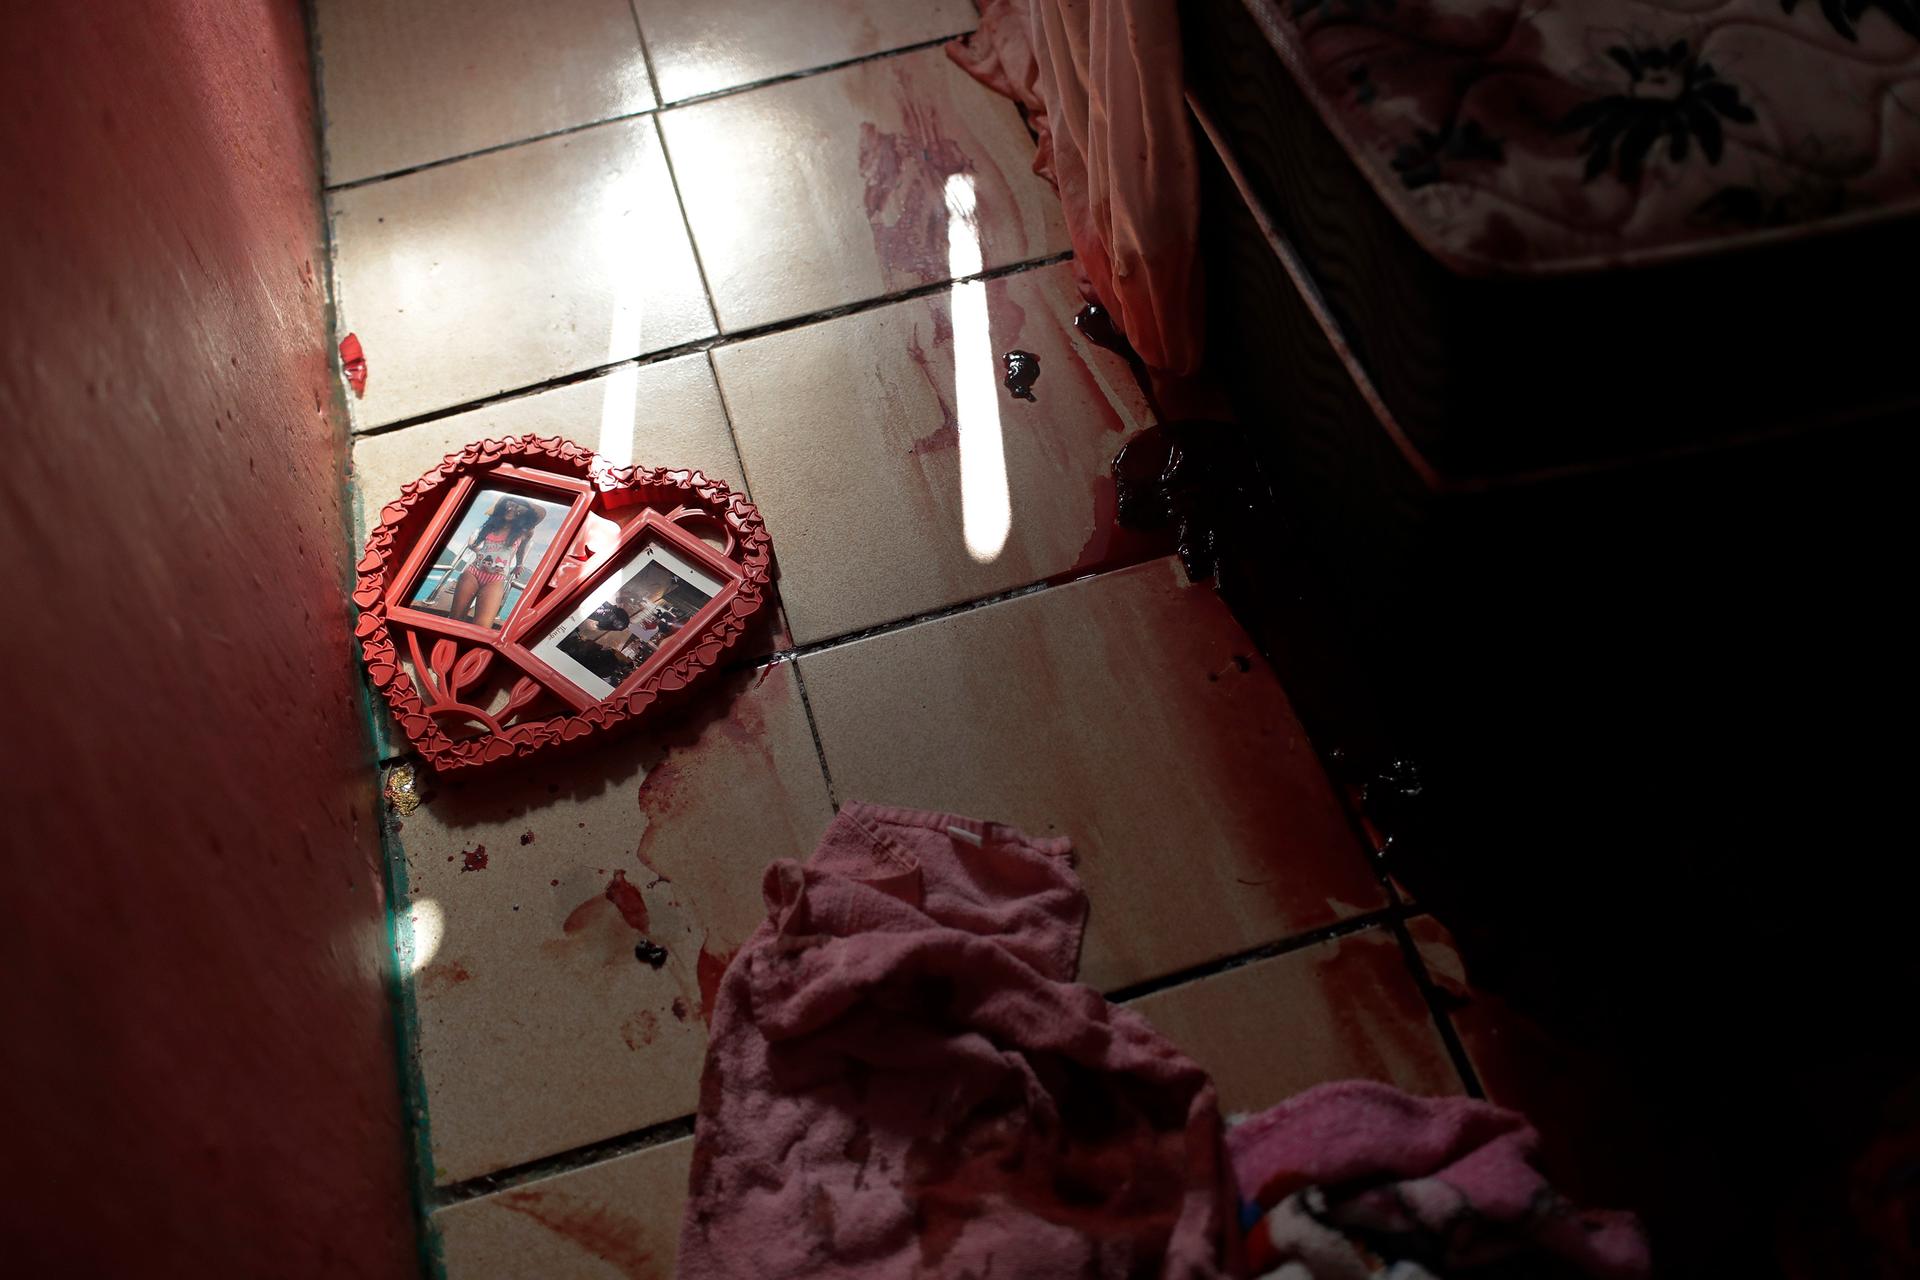 Blood covers the floor and a picture frame in a shape of a heart, inside a home during a police raid targeting drug traffickers in the Jacarezinho favela of Rio de Janeiro, Brazil, May 6, 2021.